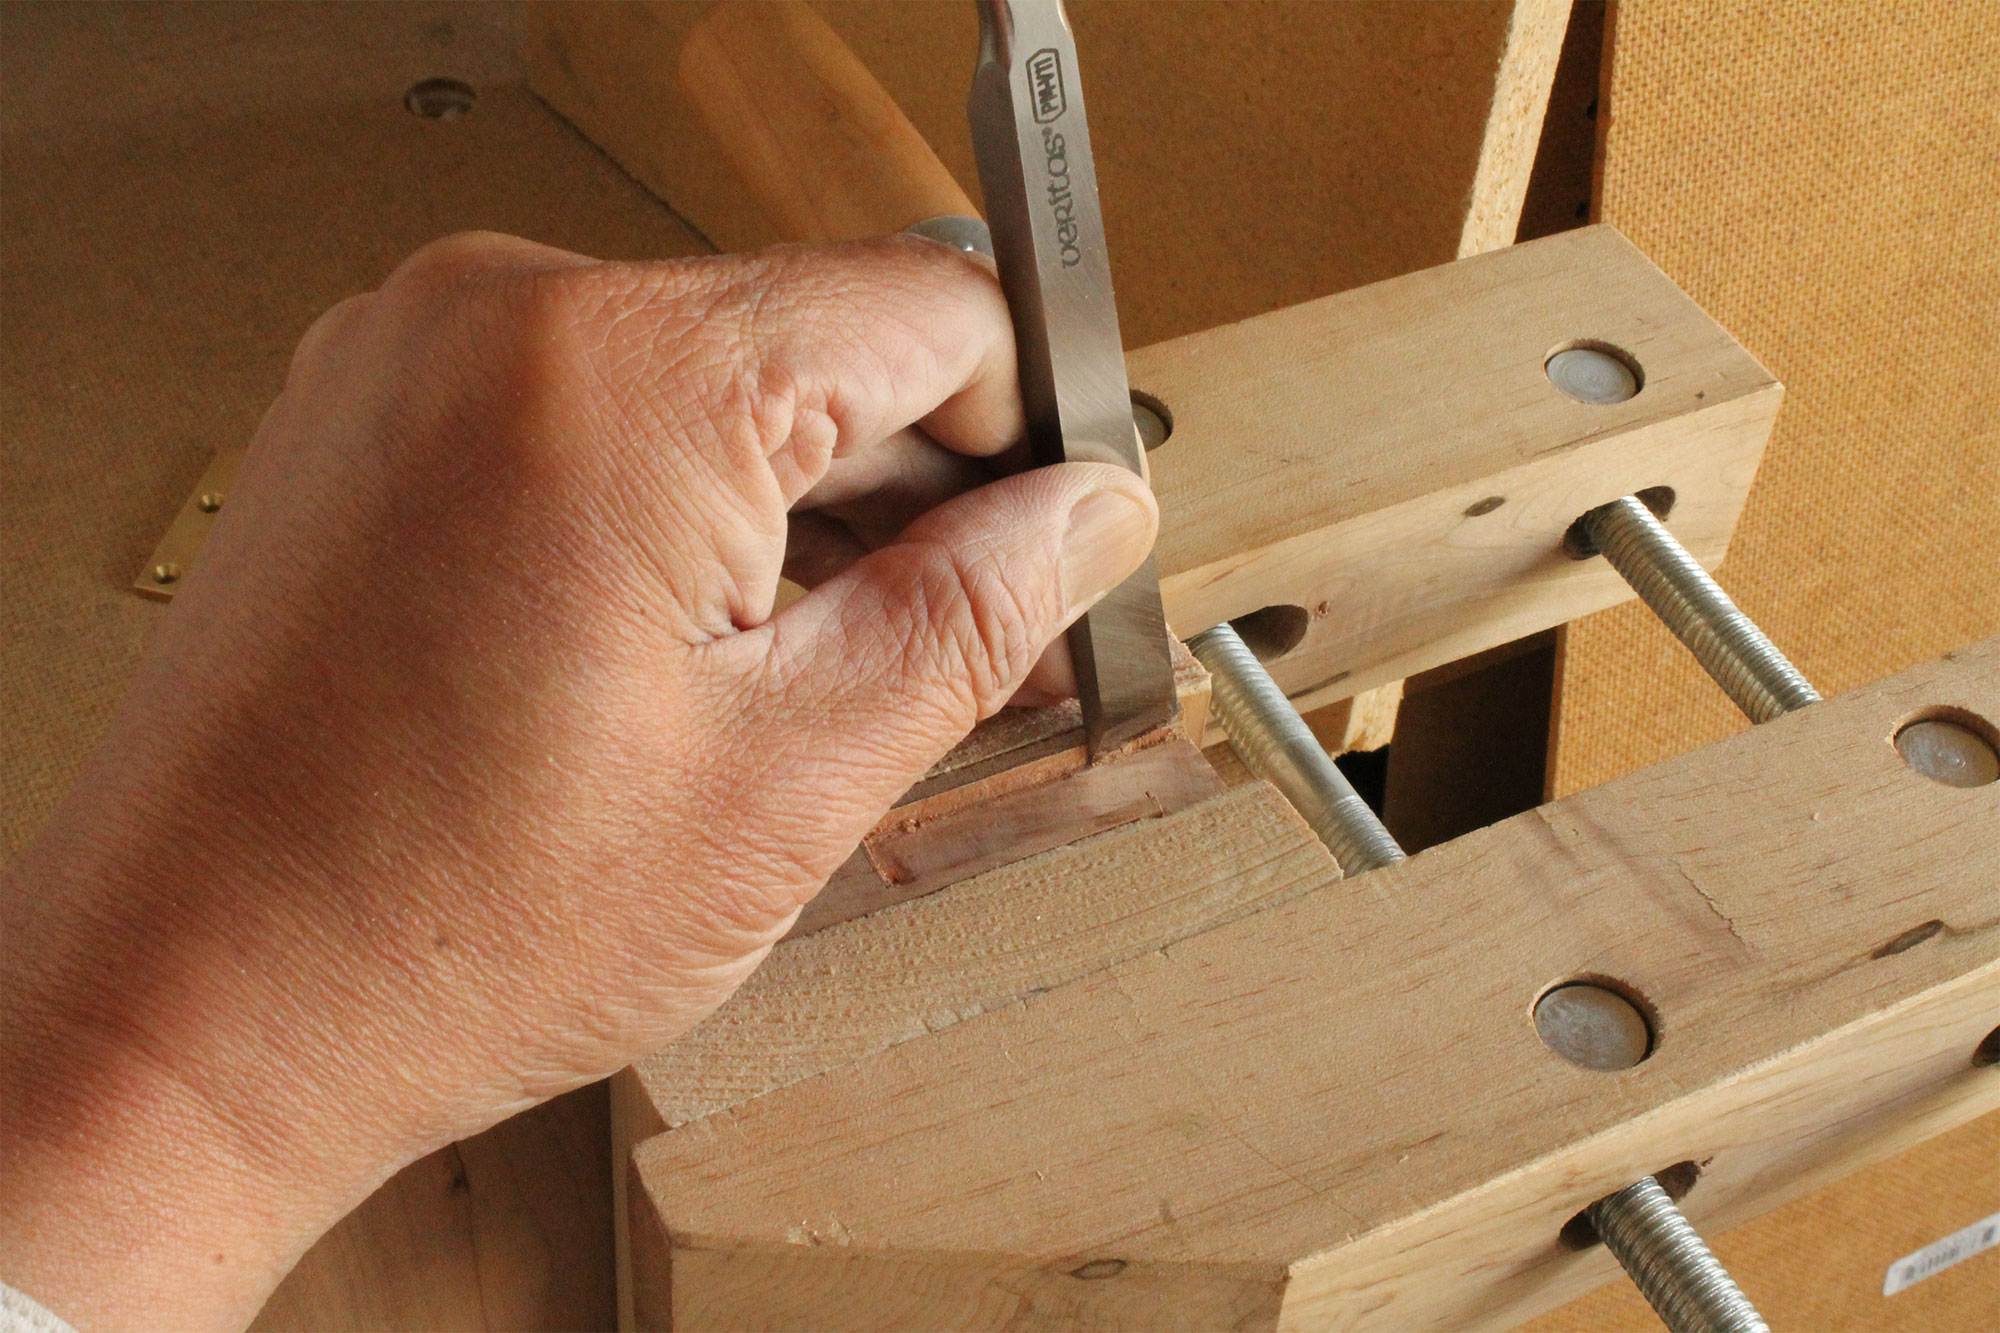 Using the handscrew jaws as a hand rest.